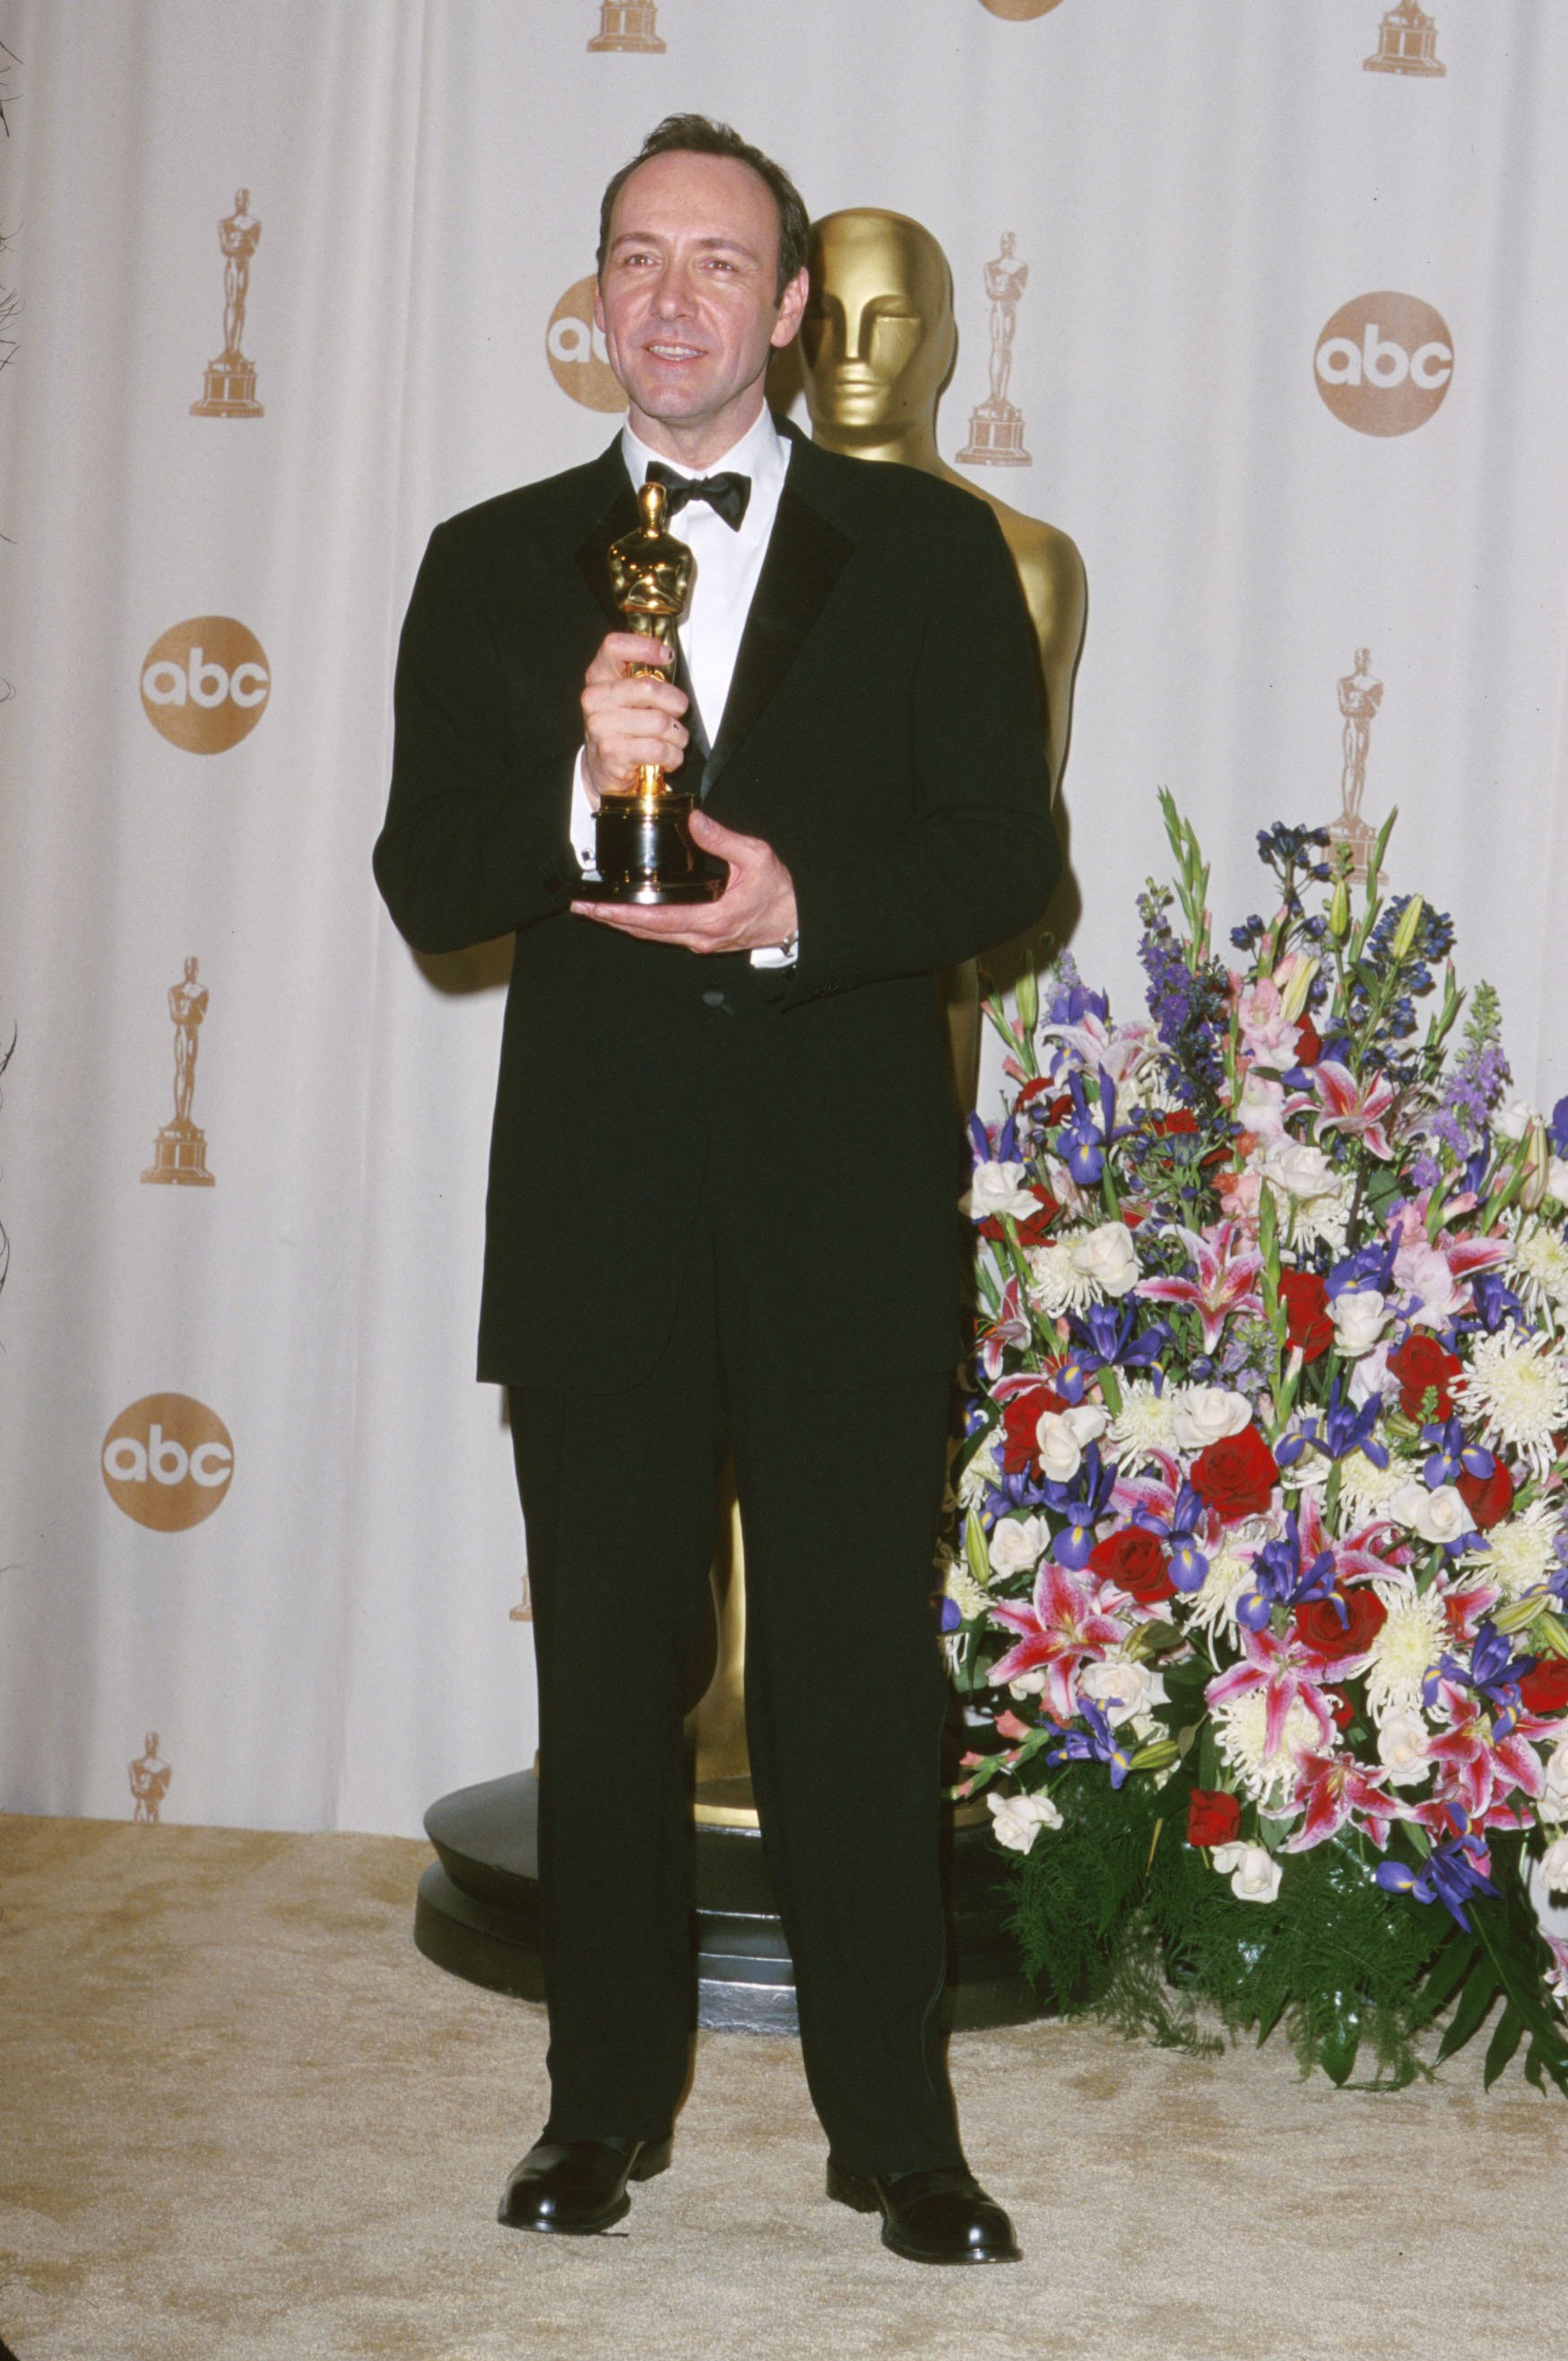 Kevin Spacey at the 72nd Annual Academy Awards in Los Angeles, California | Source: Getty Images 